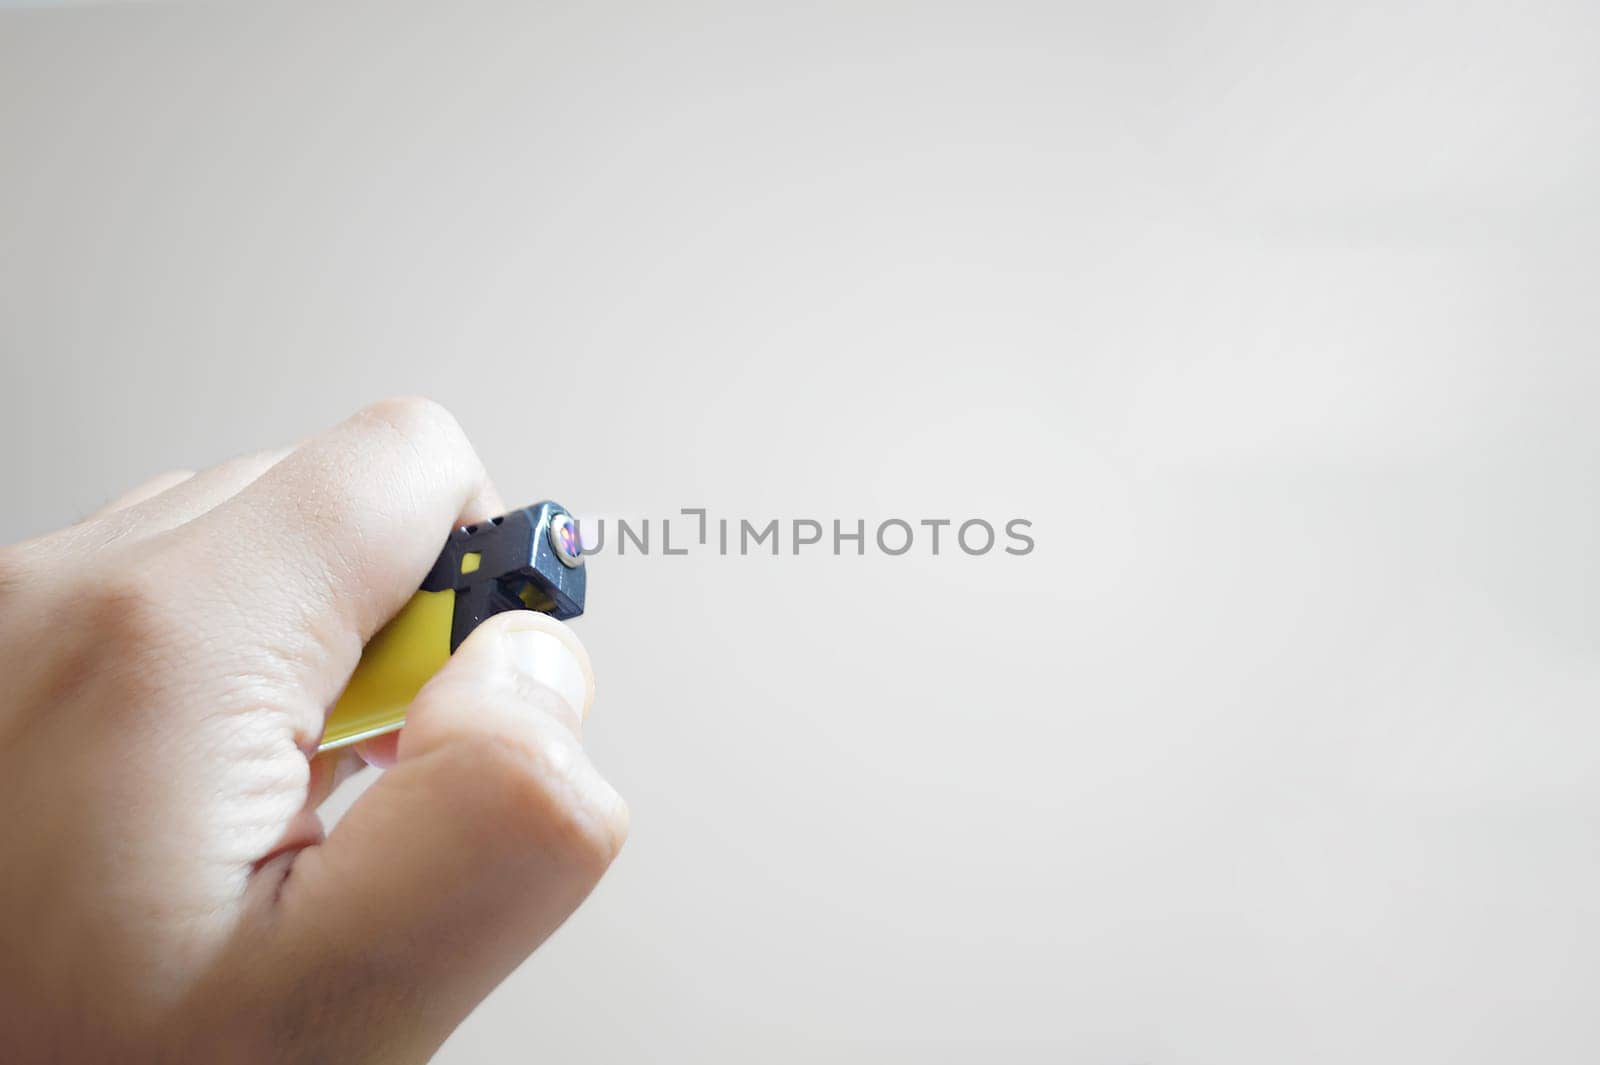 A person is holding a lighter in their hand. High quality photo